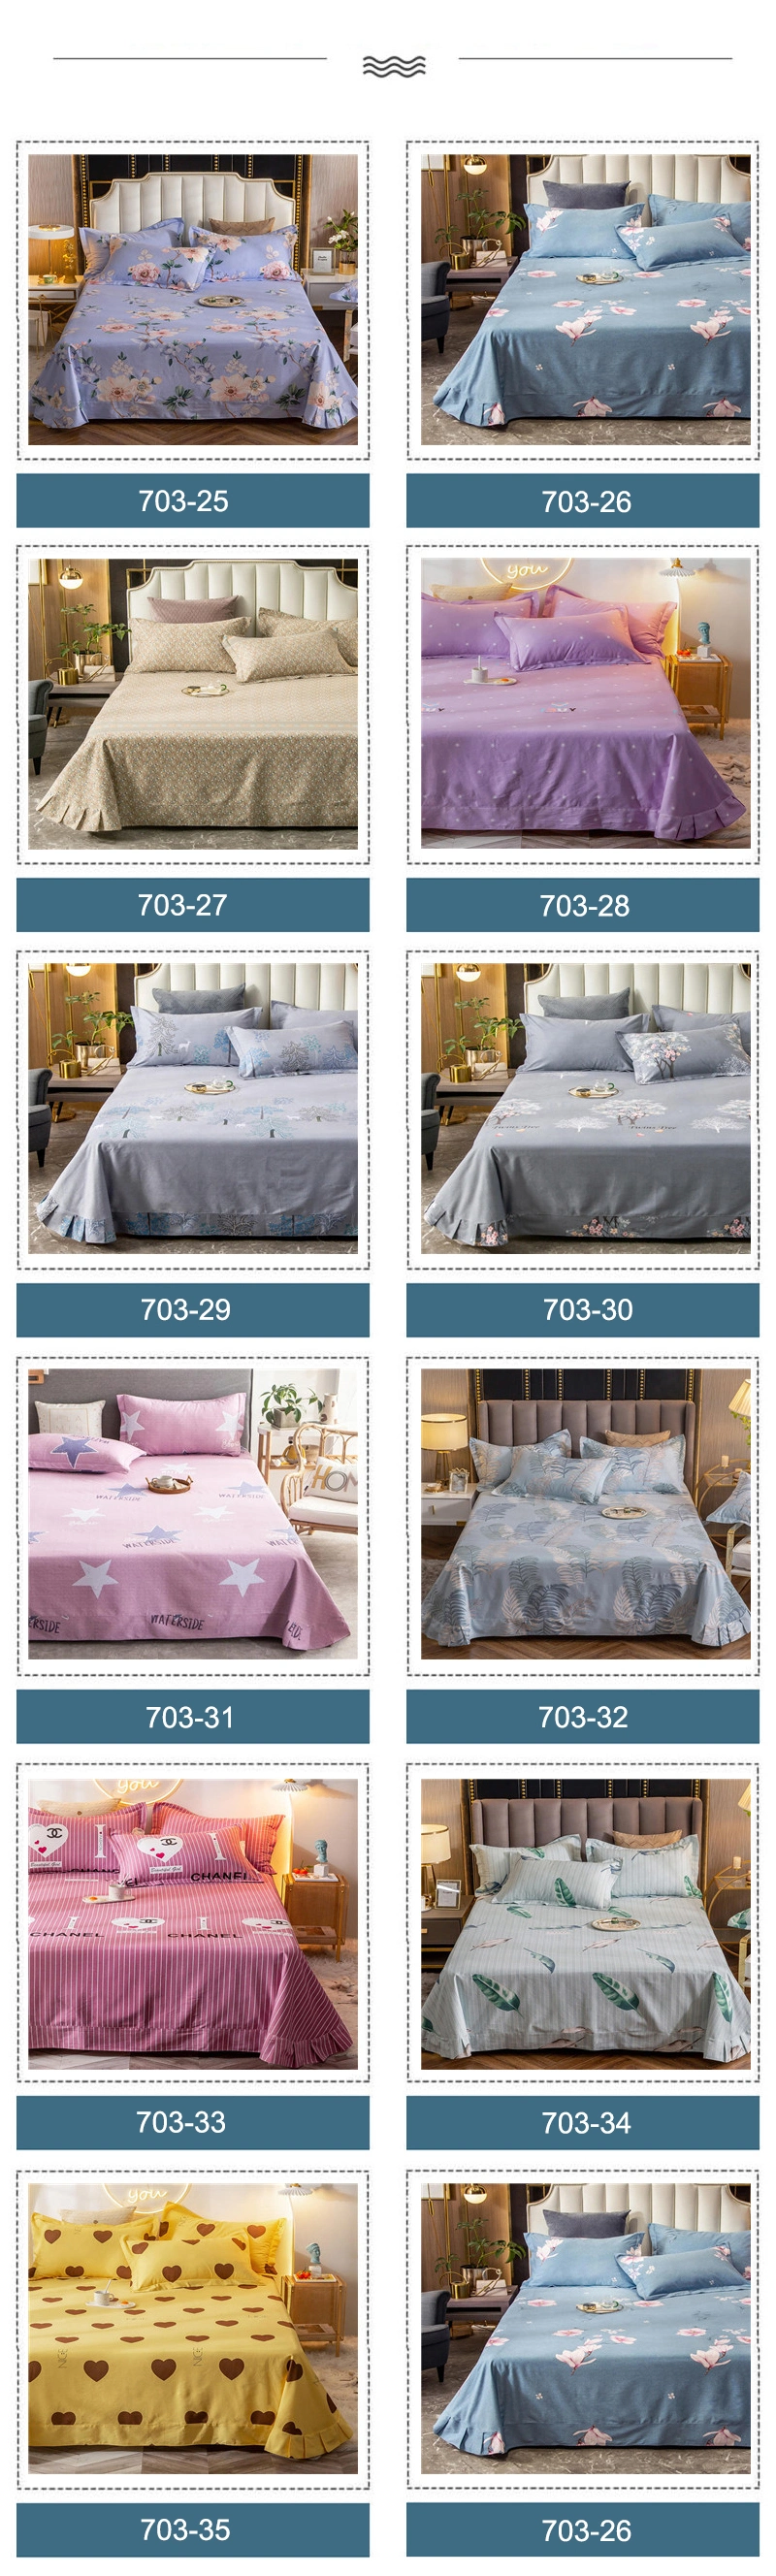 New Product Bed Sheet Set Best Quality Comfortable Fade Washed Blue Leaf Printing Double Bed Linen